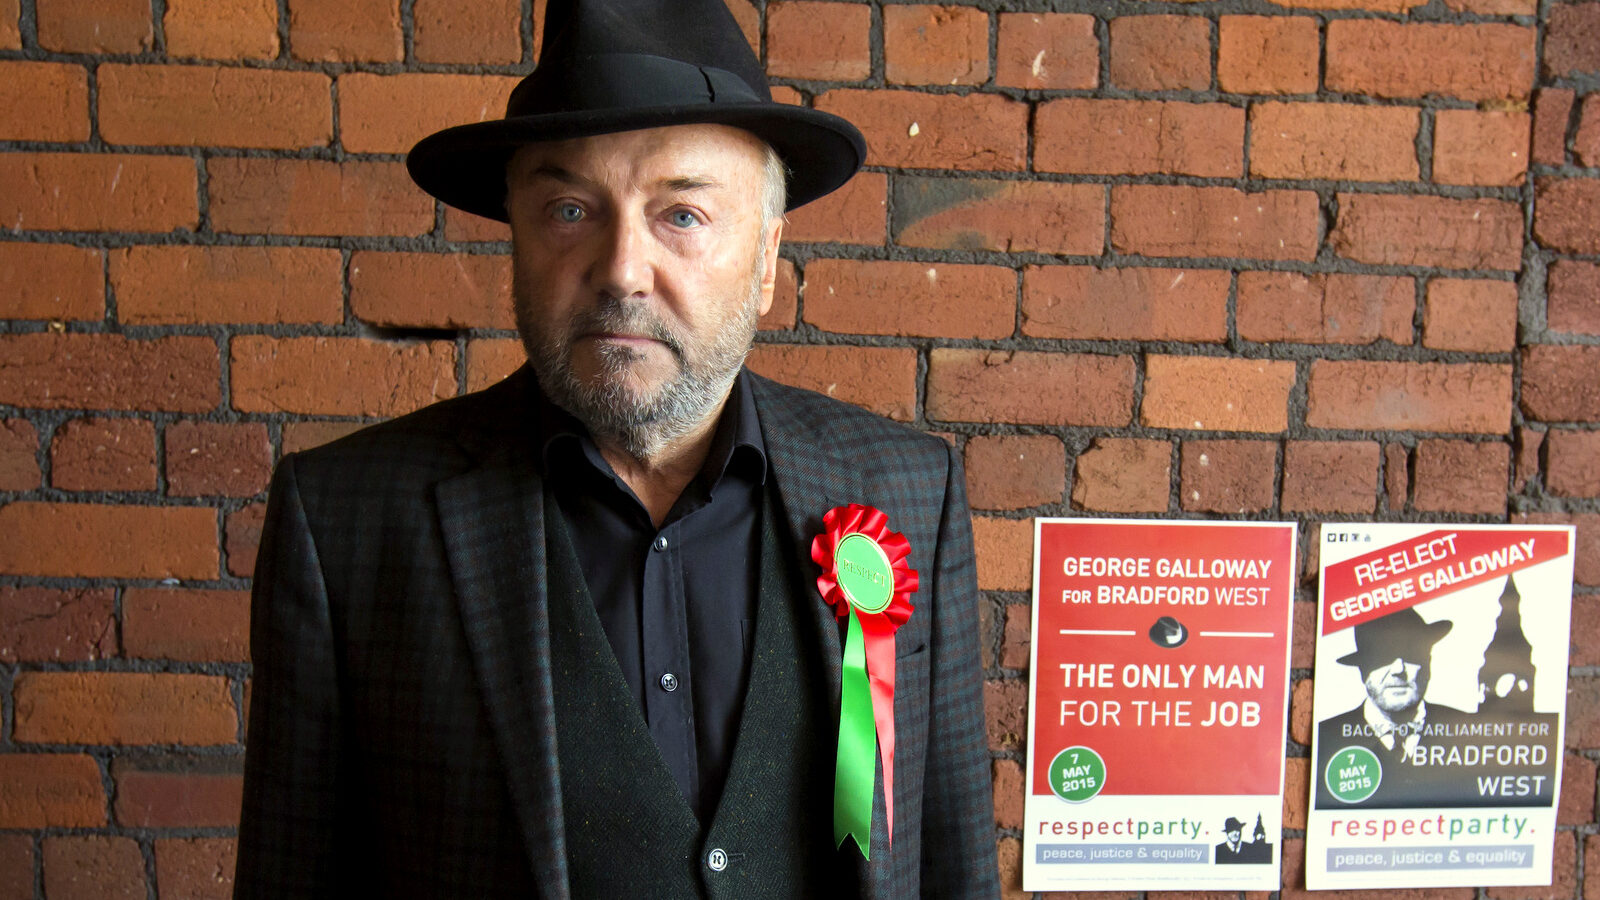 Respect Party Leader George Galloway poses for a picture after an interview at his offices in the constituency of Bradford West, in Bradford, England. (AP Photo/Jon Super)